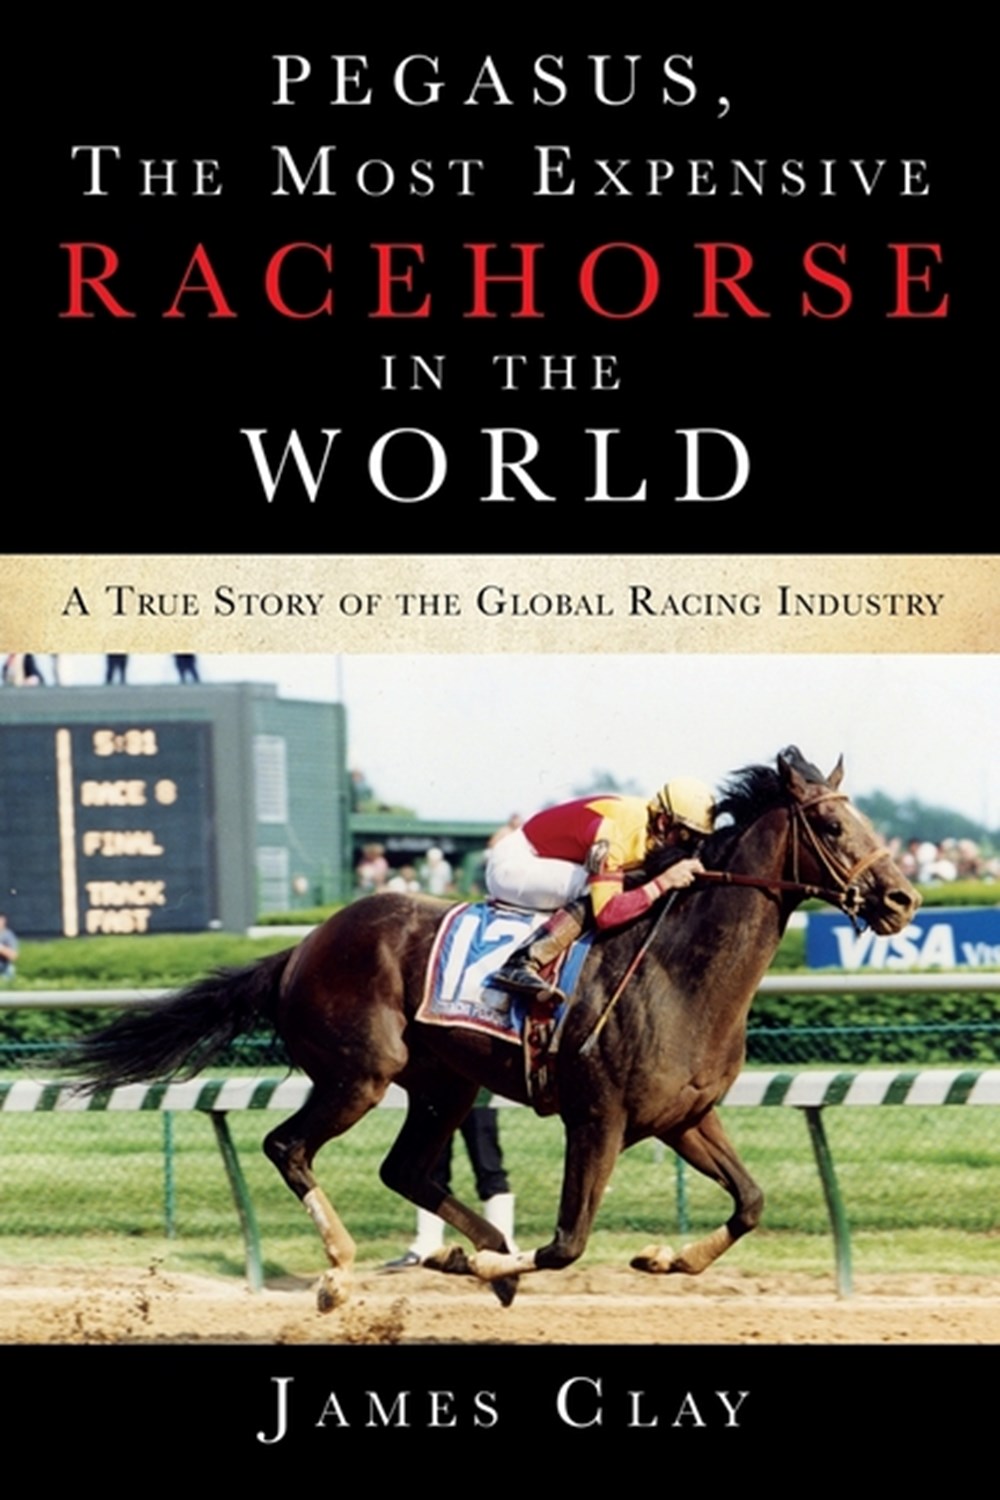 Pegasus, The Most Expensive Racehorse in the World: A True Story of the Global Racing Industry